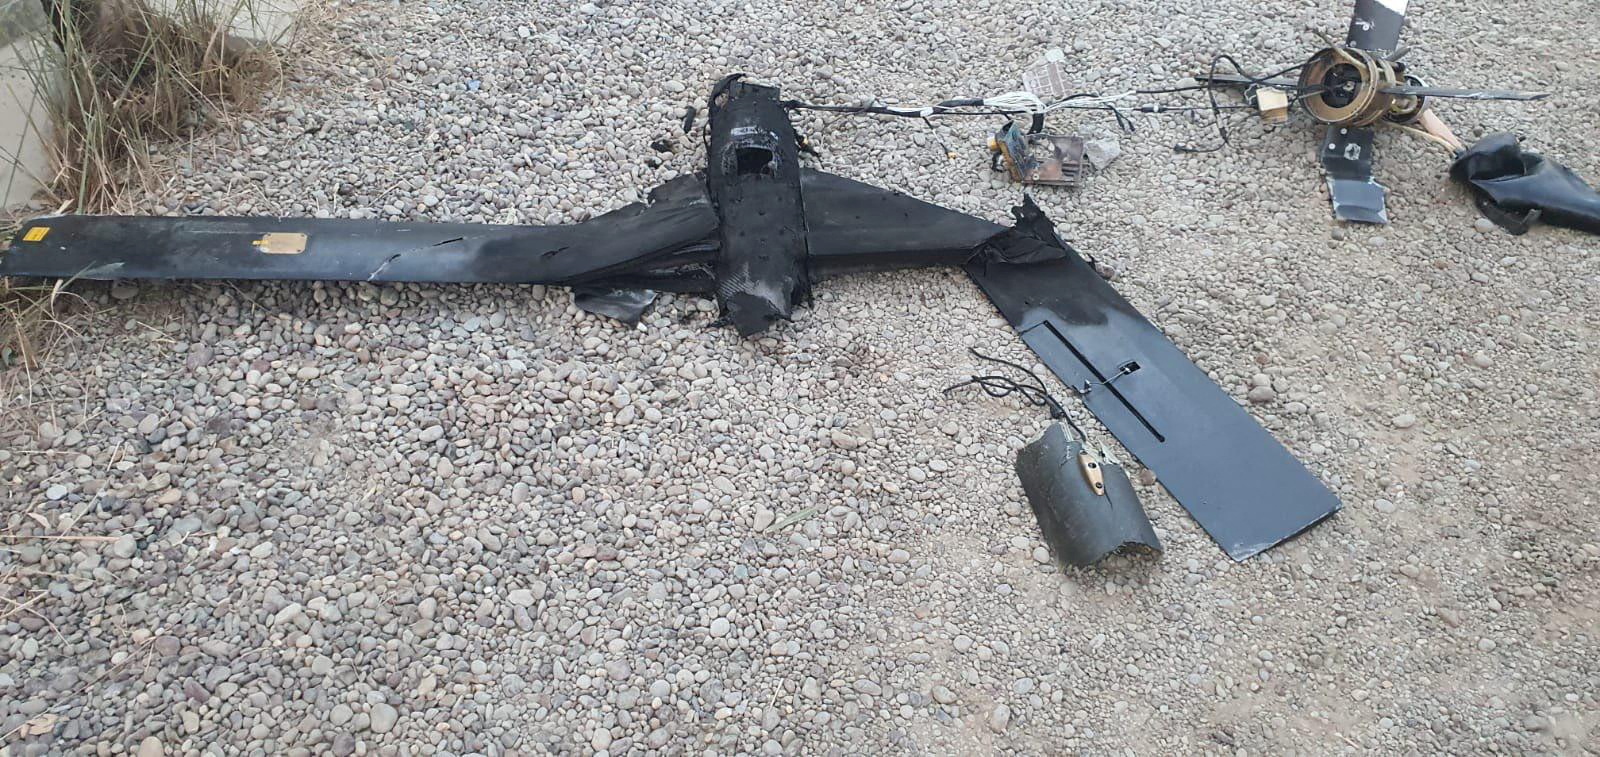 The remains of the wreckage of a drone are seen at Baghdad airport